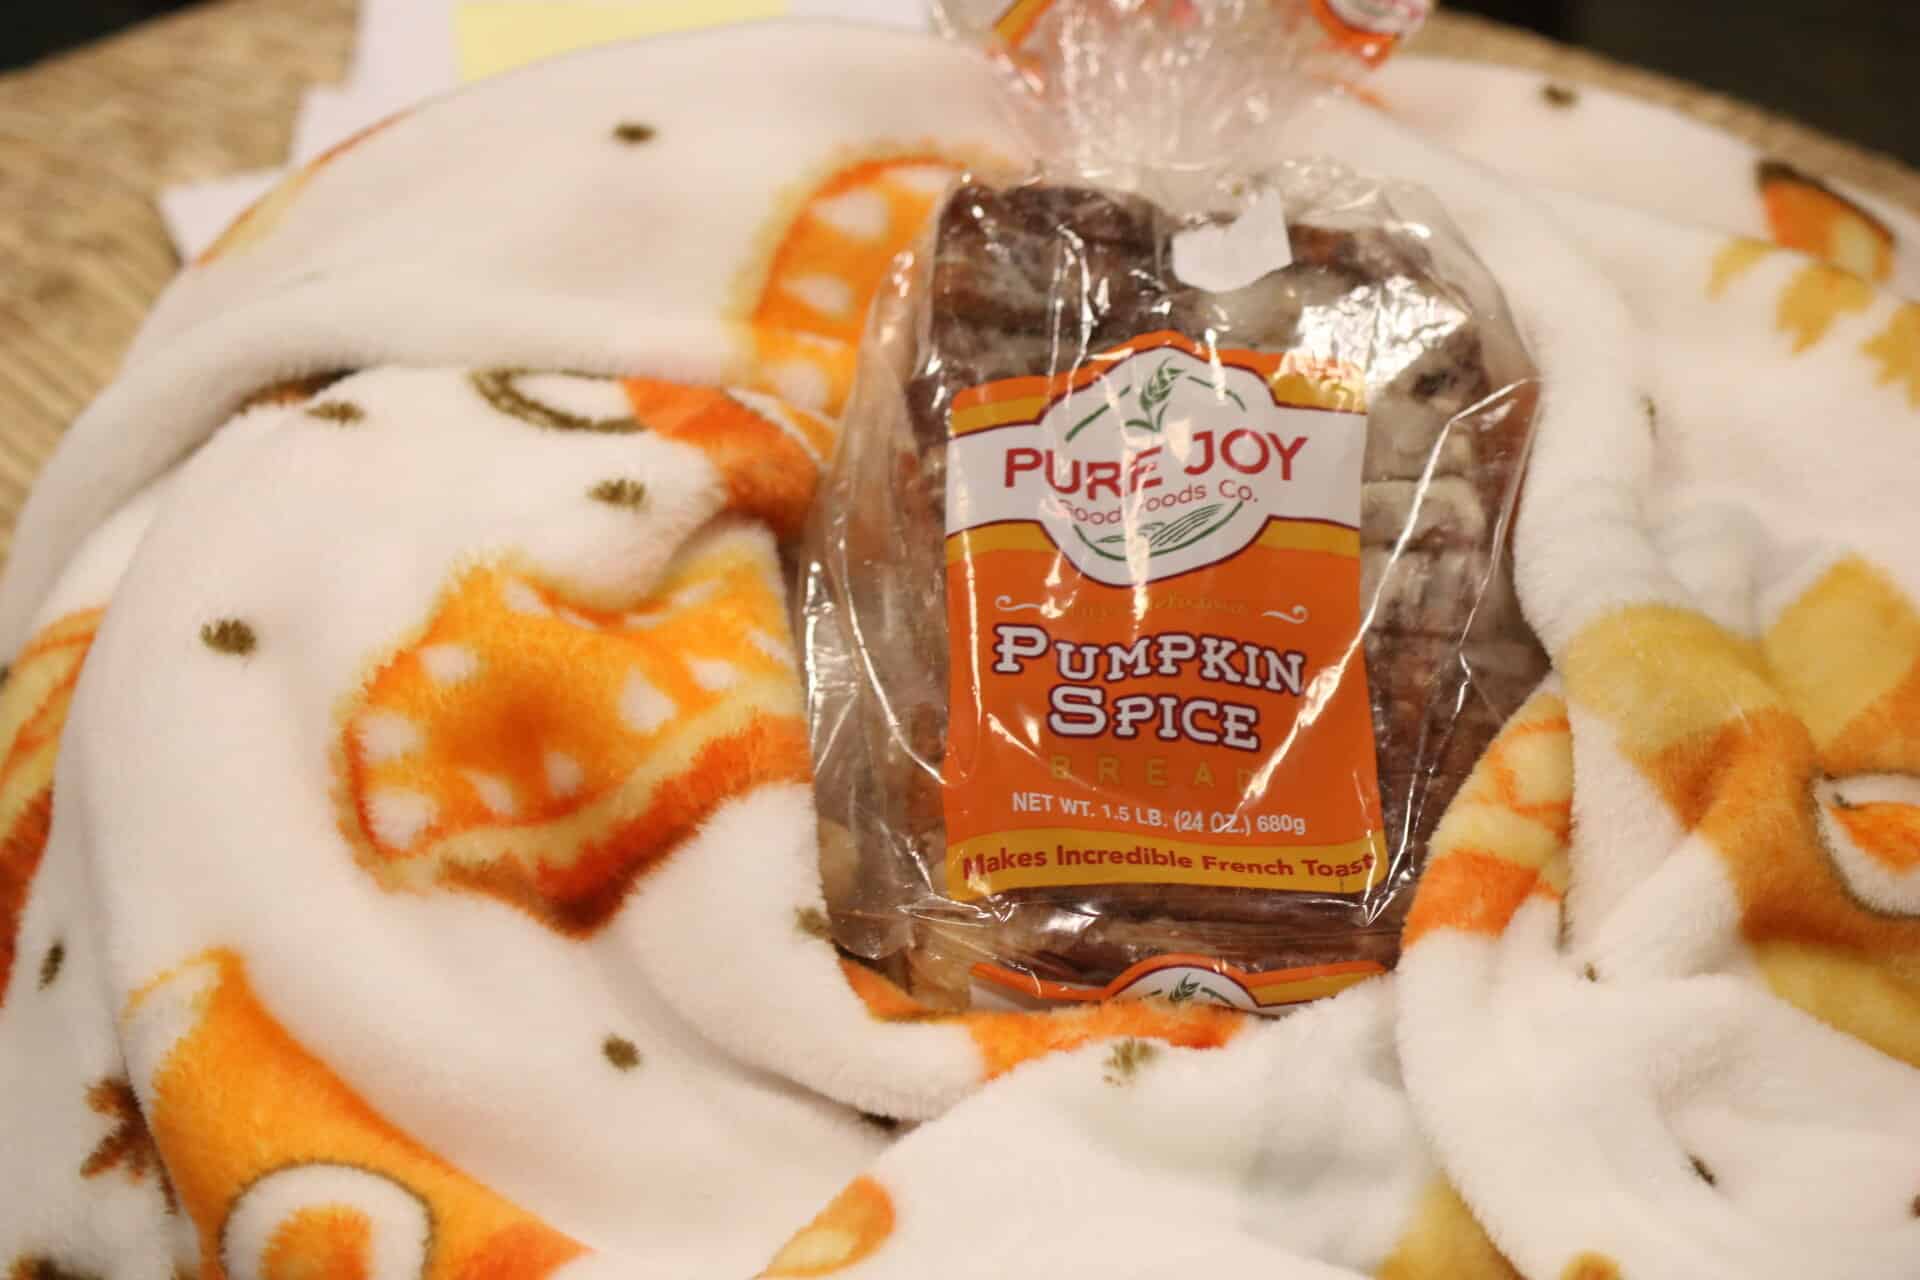 This pumpkin spice bread from Publix is delicious and great for French toast.